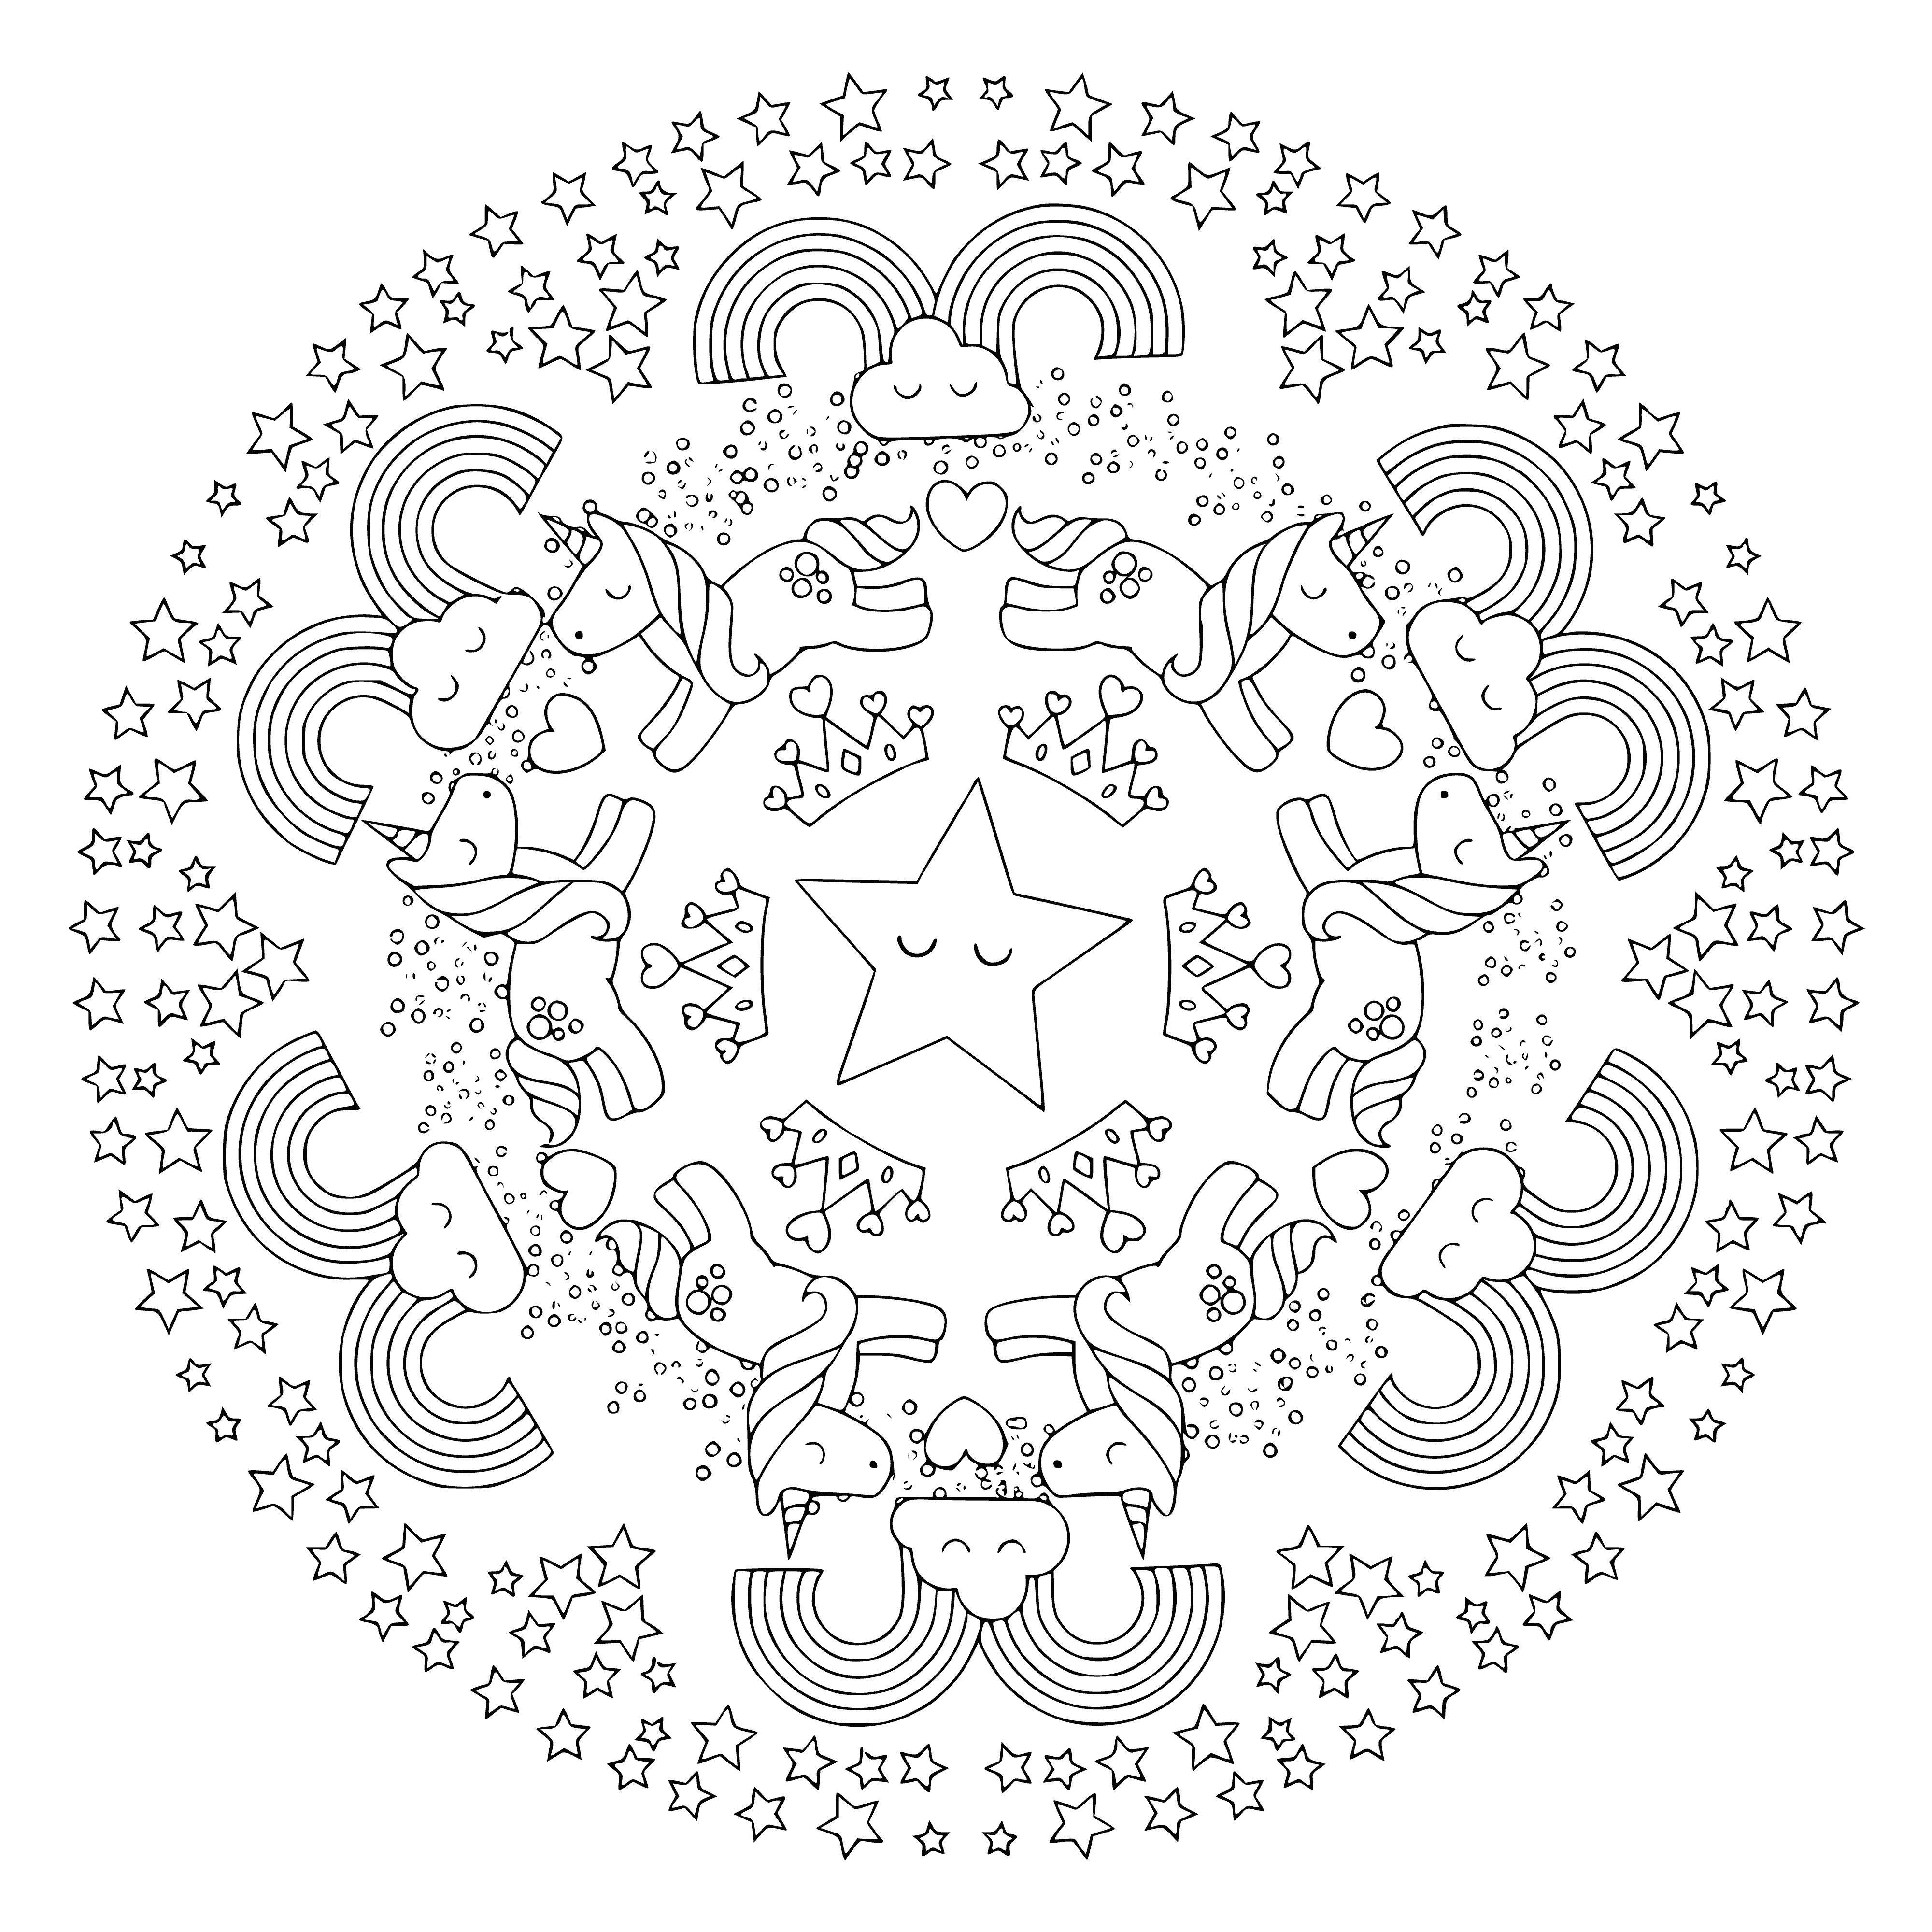 coloring page: Mandalas are a mystical symbol with a unicorn at their center, encircled by stars, flowers and moons.